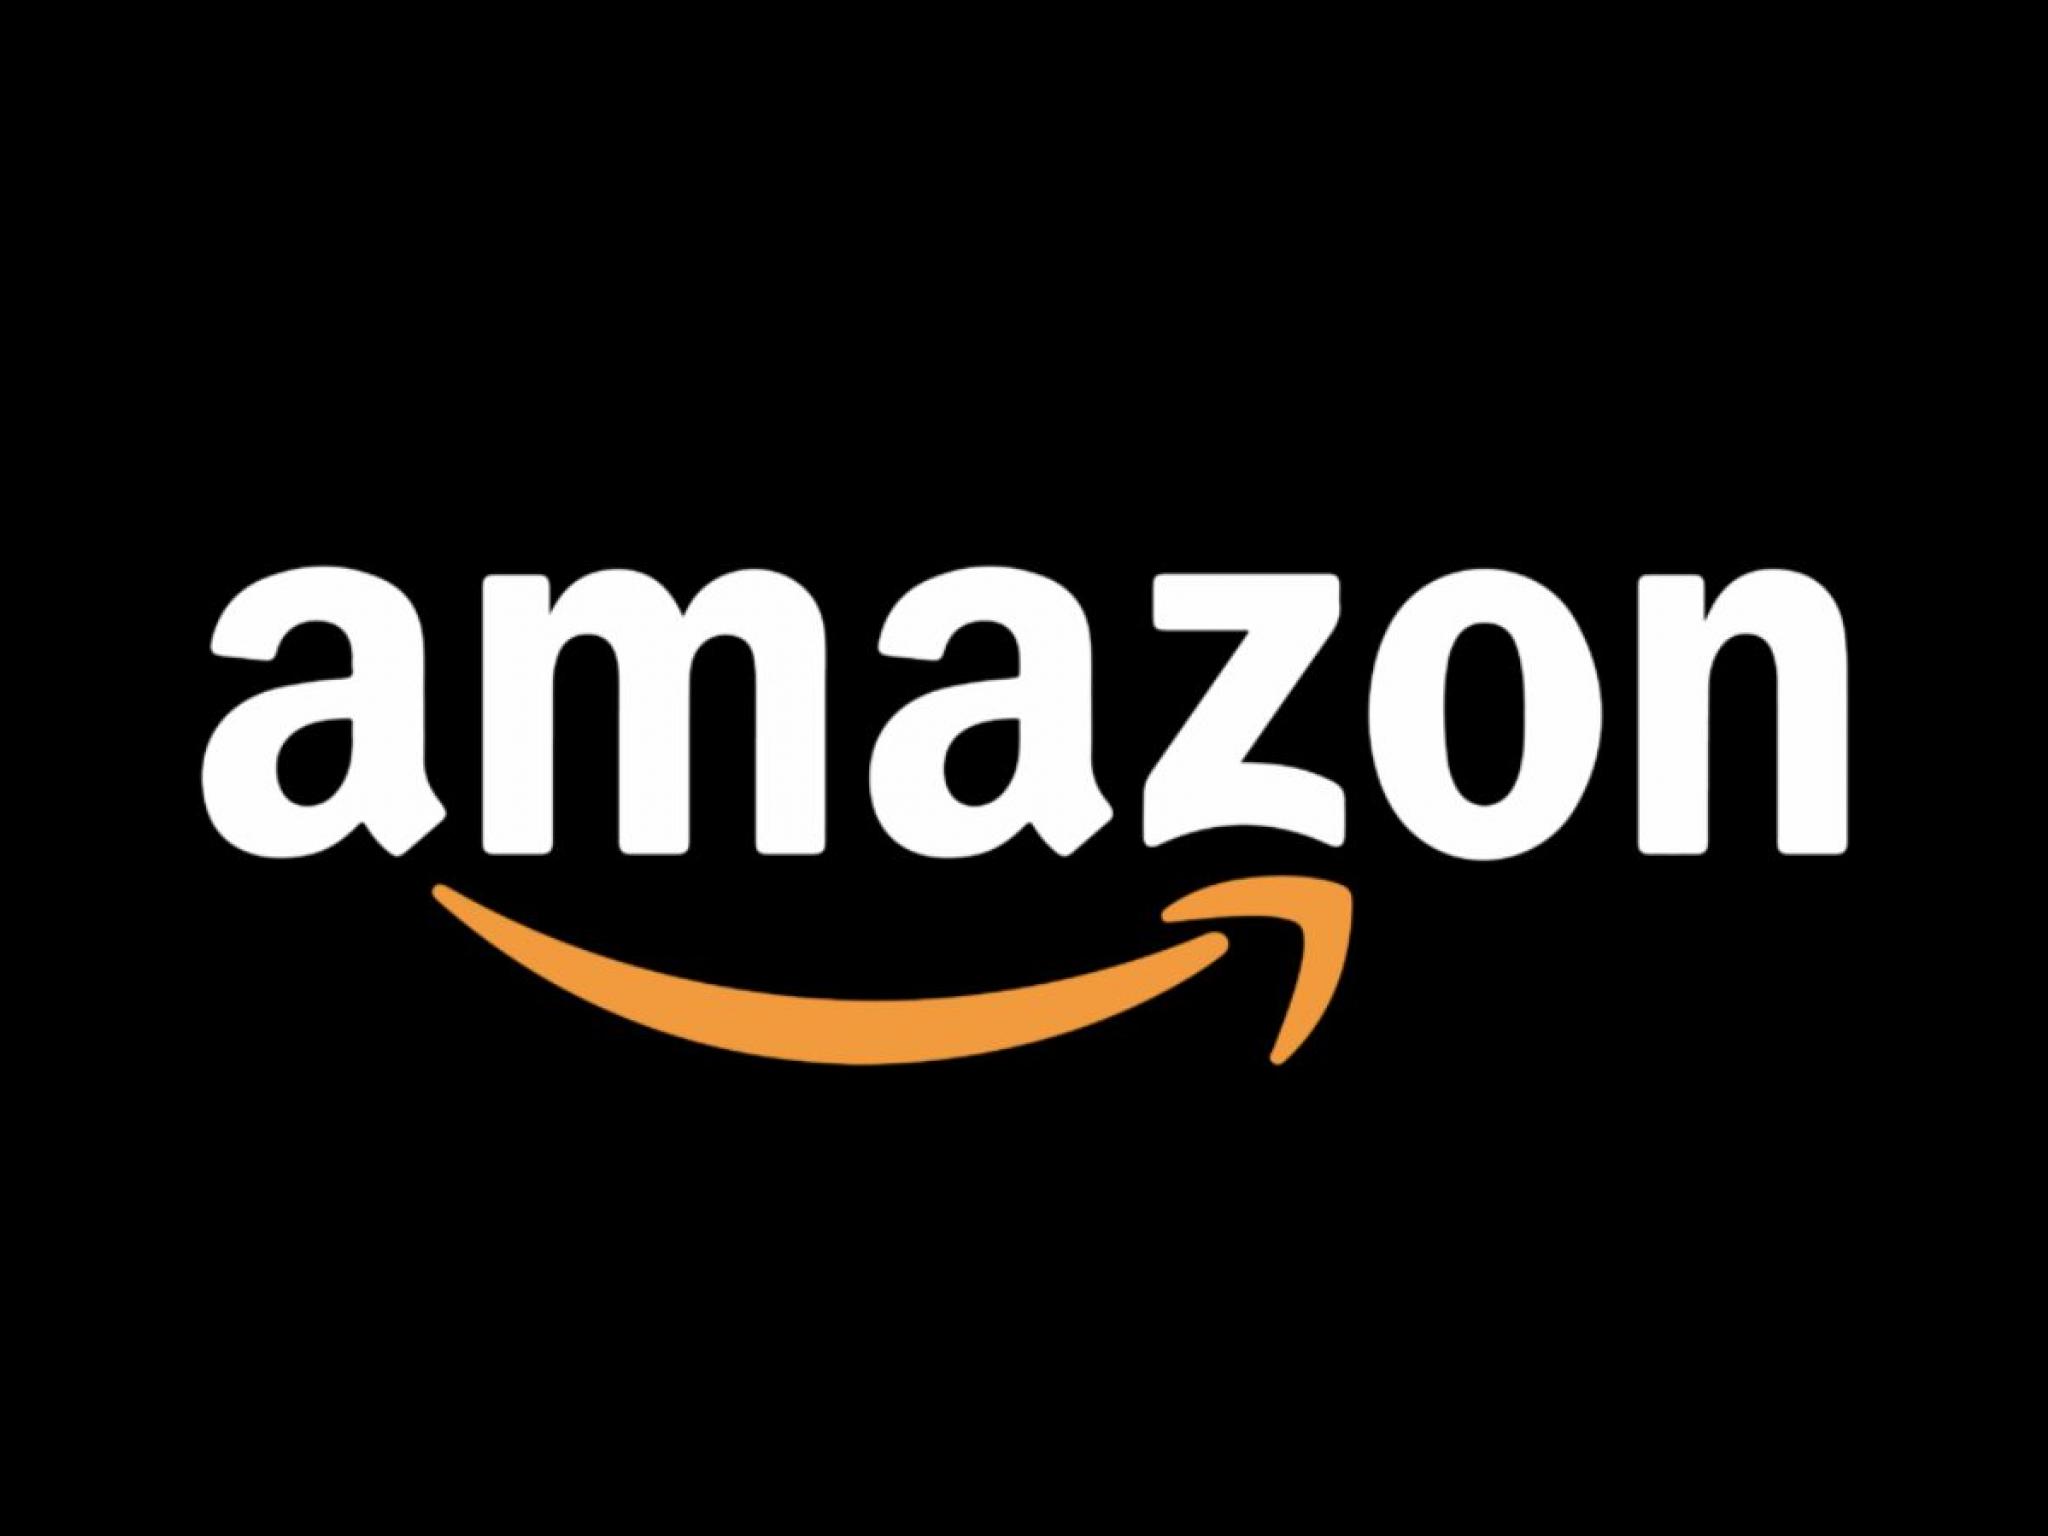  amazon-mongodb-and-2-other-stocks-insiders-are-selling 